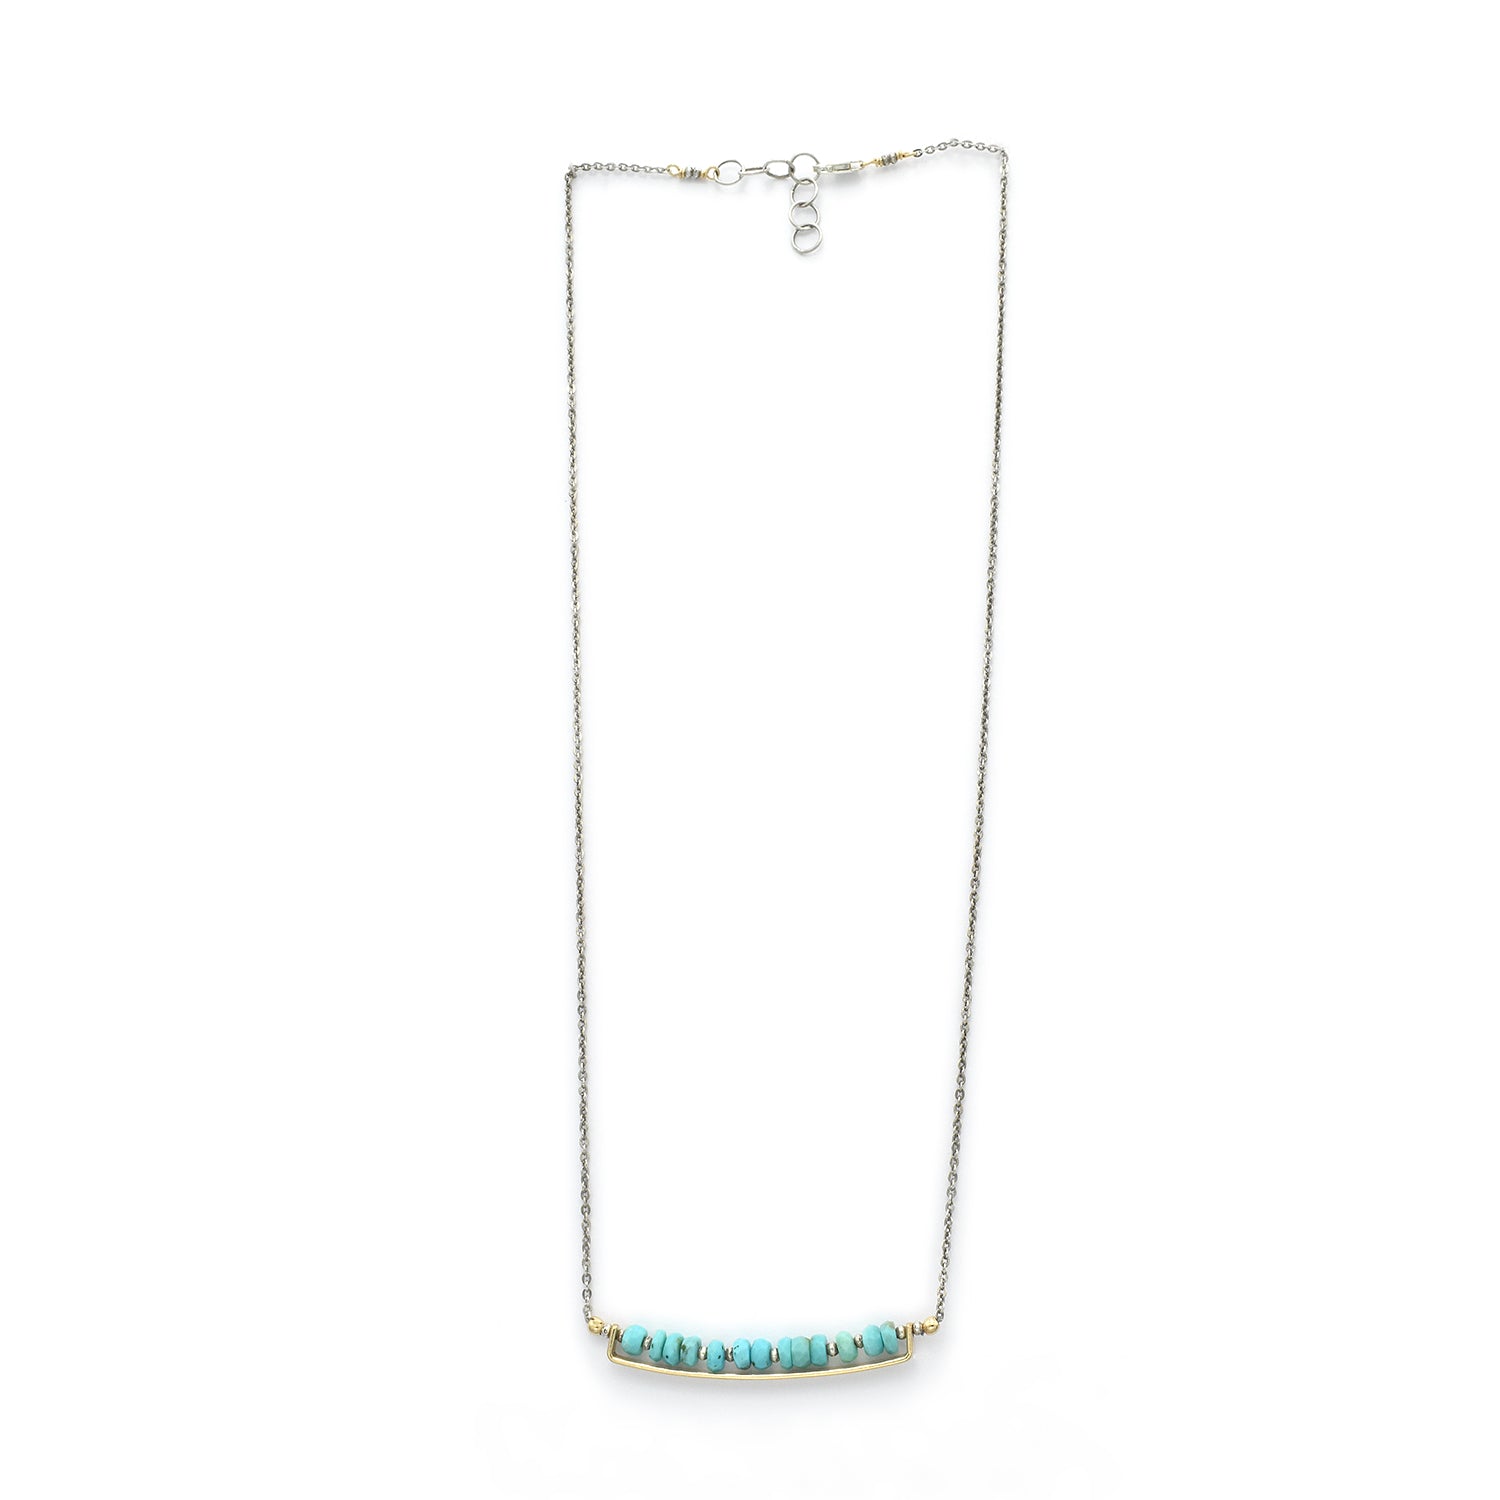 Turquoise Bar Necklace - Necklaces